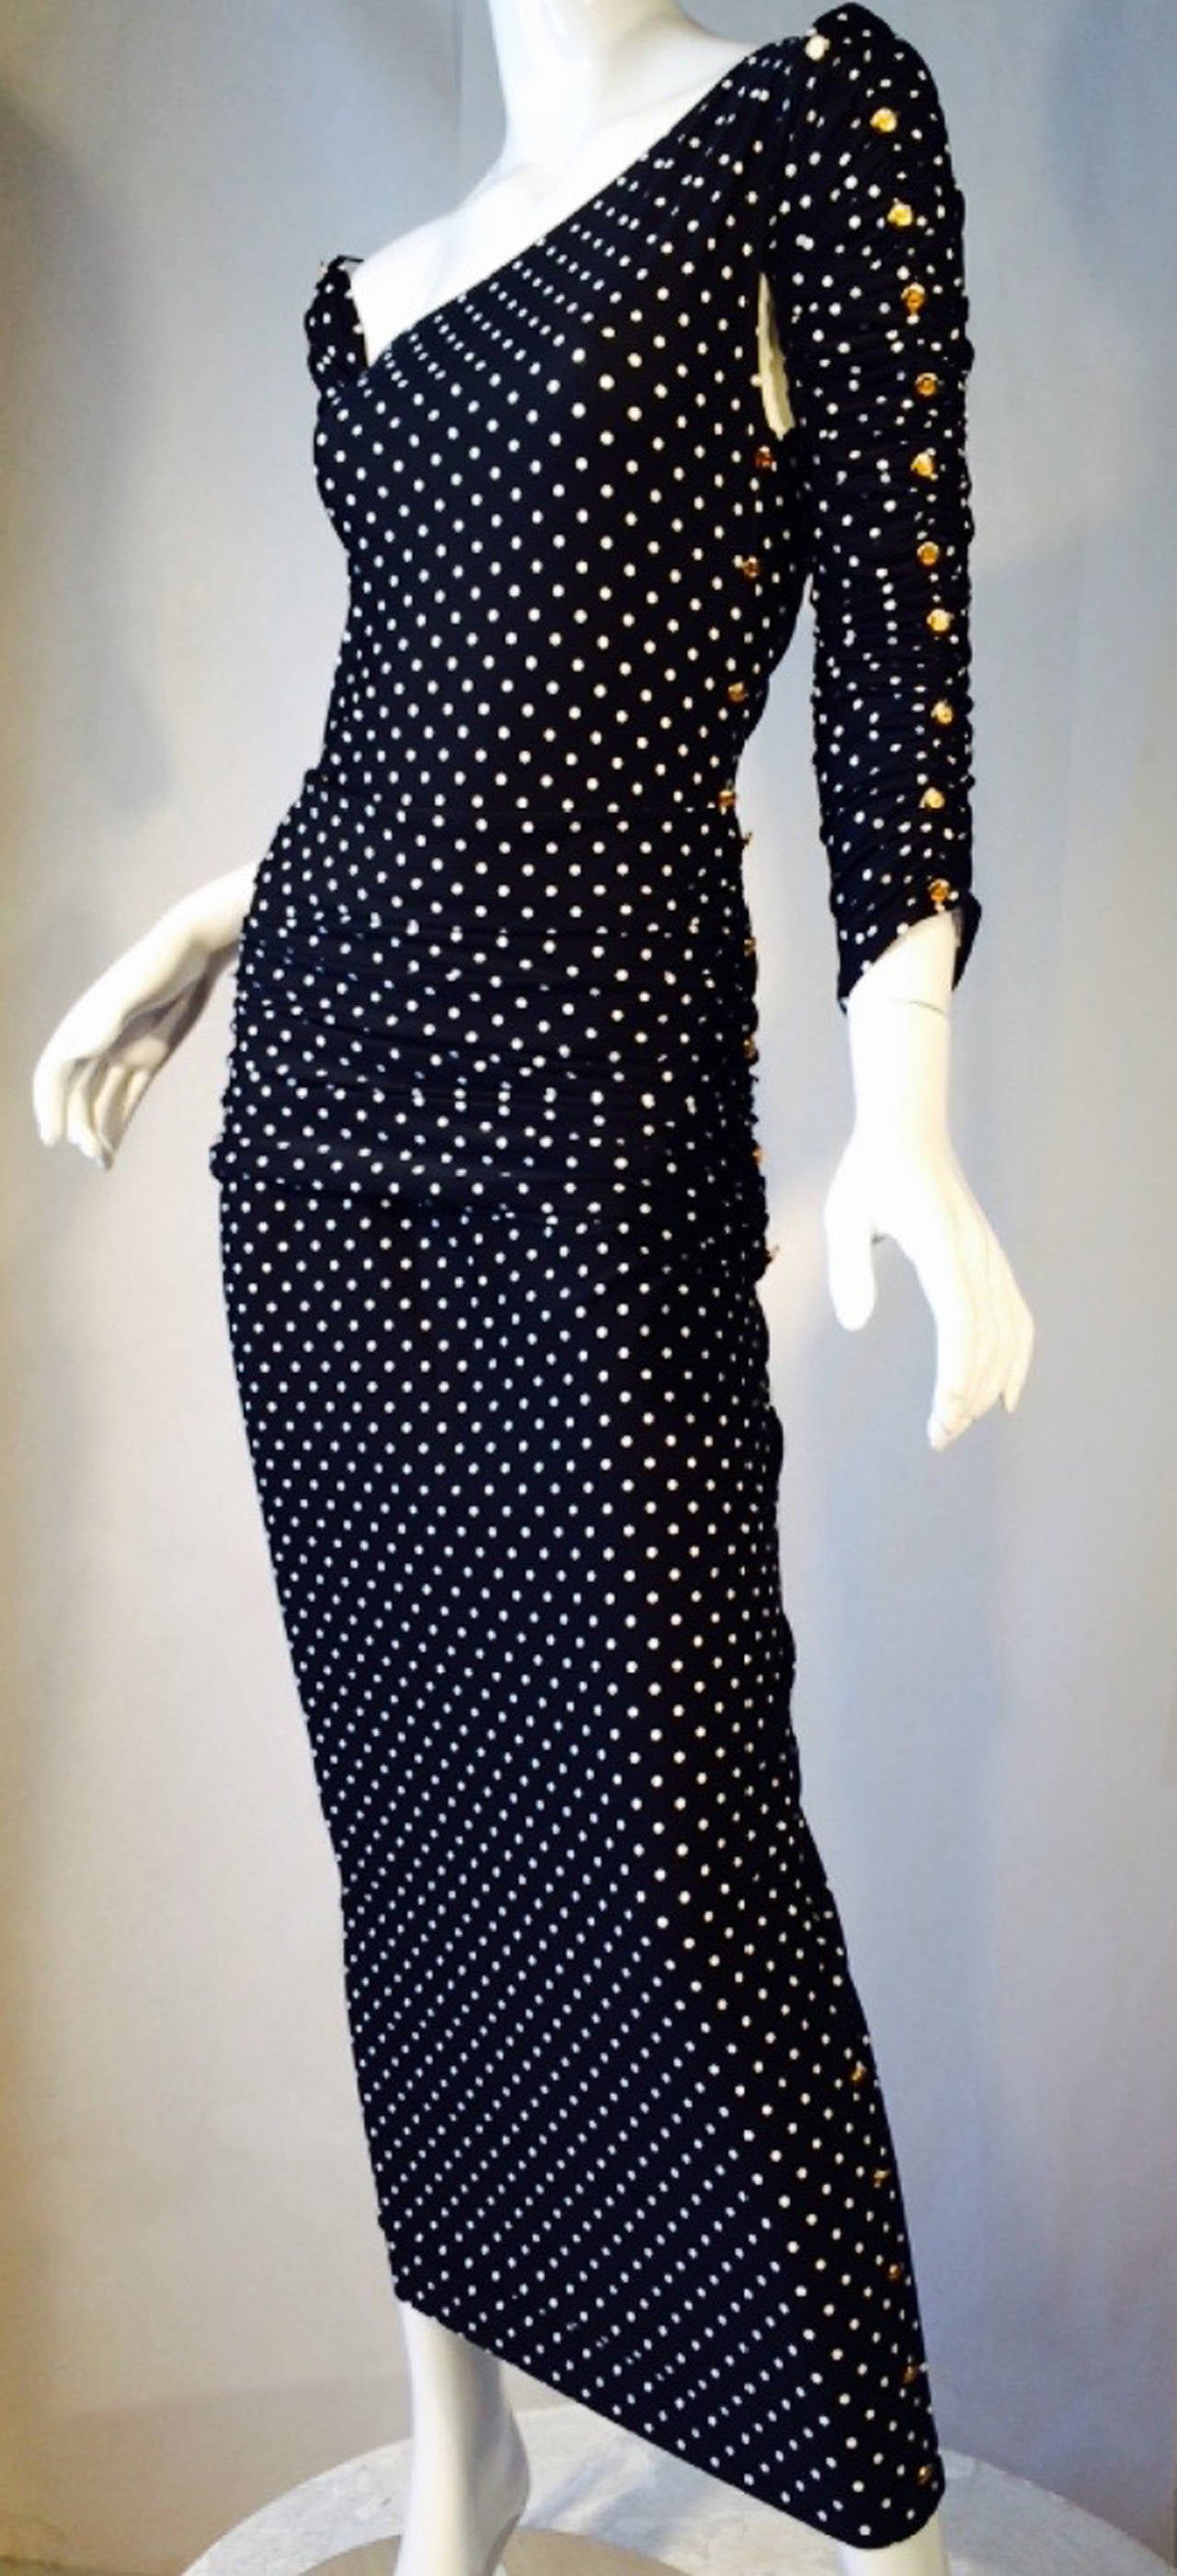 A fine and rare vintage Chanel 4pc. swim/resort ensemble. A fine dotted body-conscious jersey knit model includes a bodysuit, sleeves and both mini and full skirts. Signed gilt metal logo button trim up skirts, bodysuit and sleeves. Pristine appears